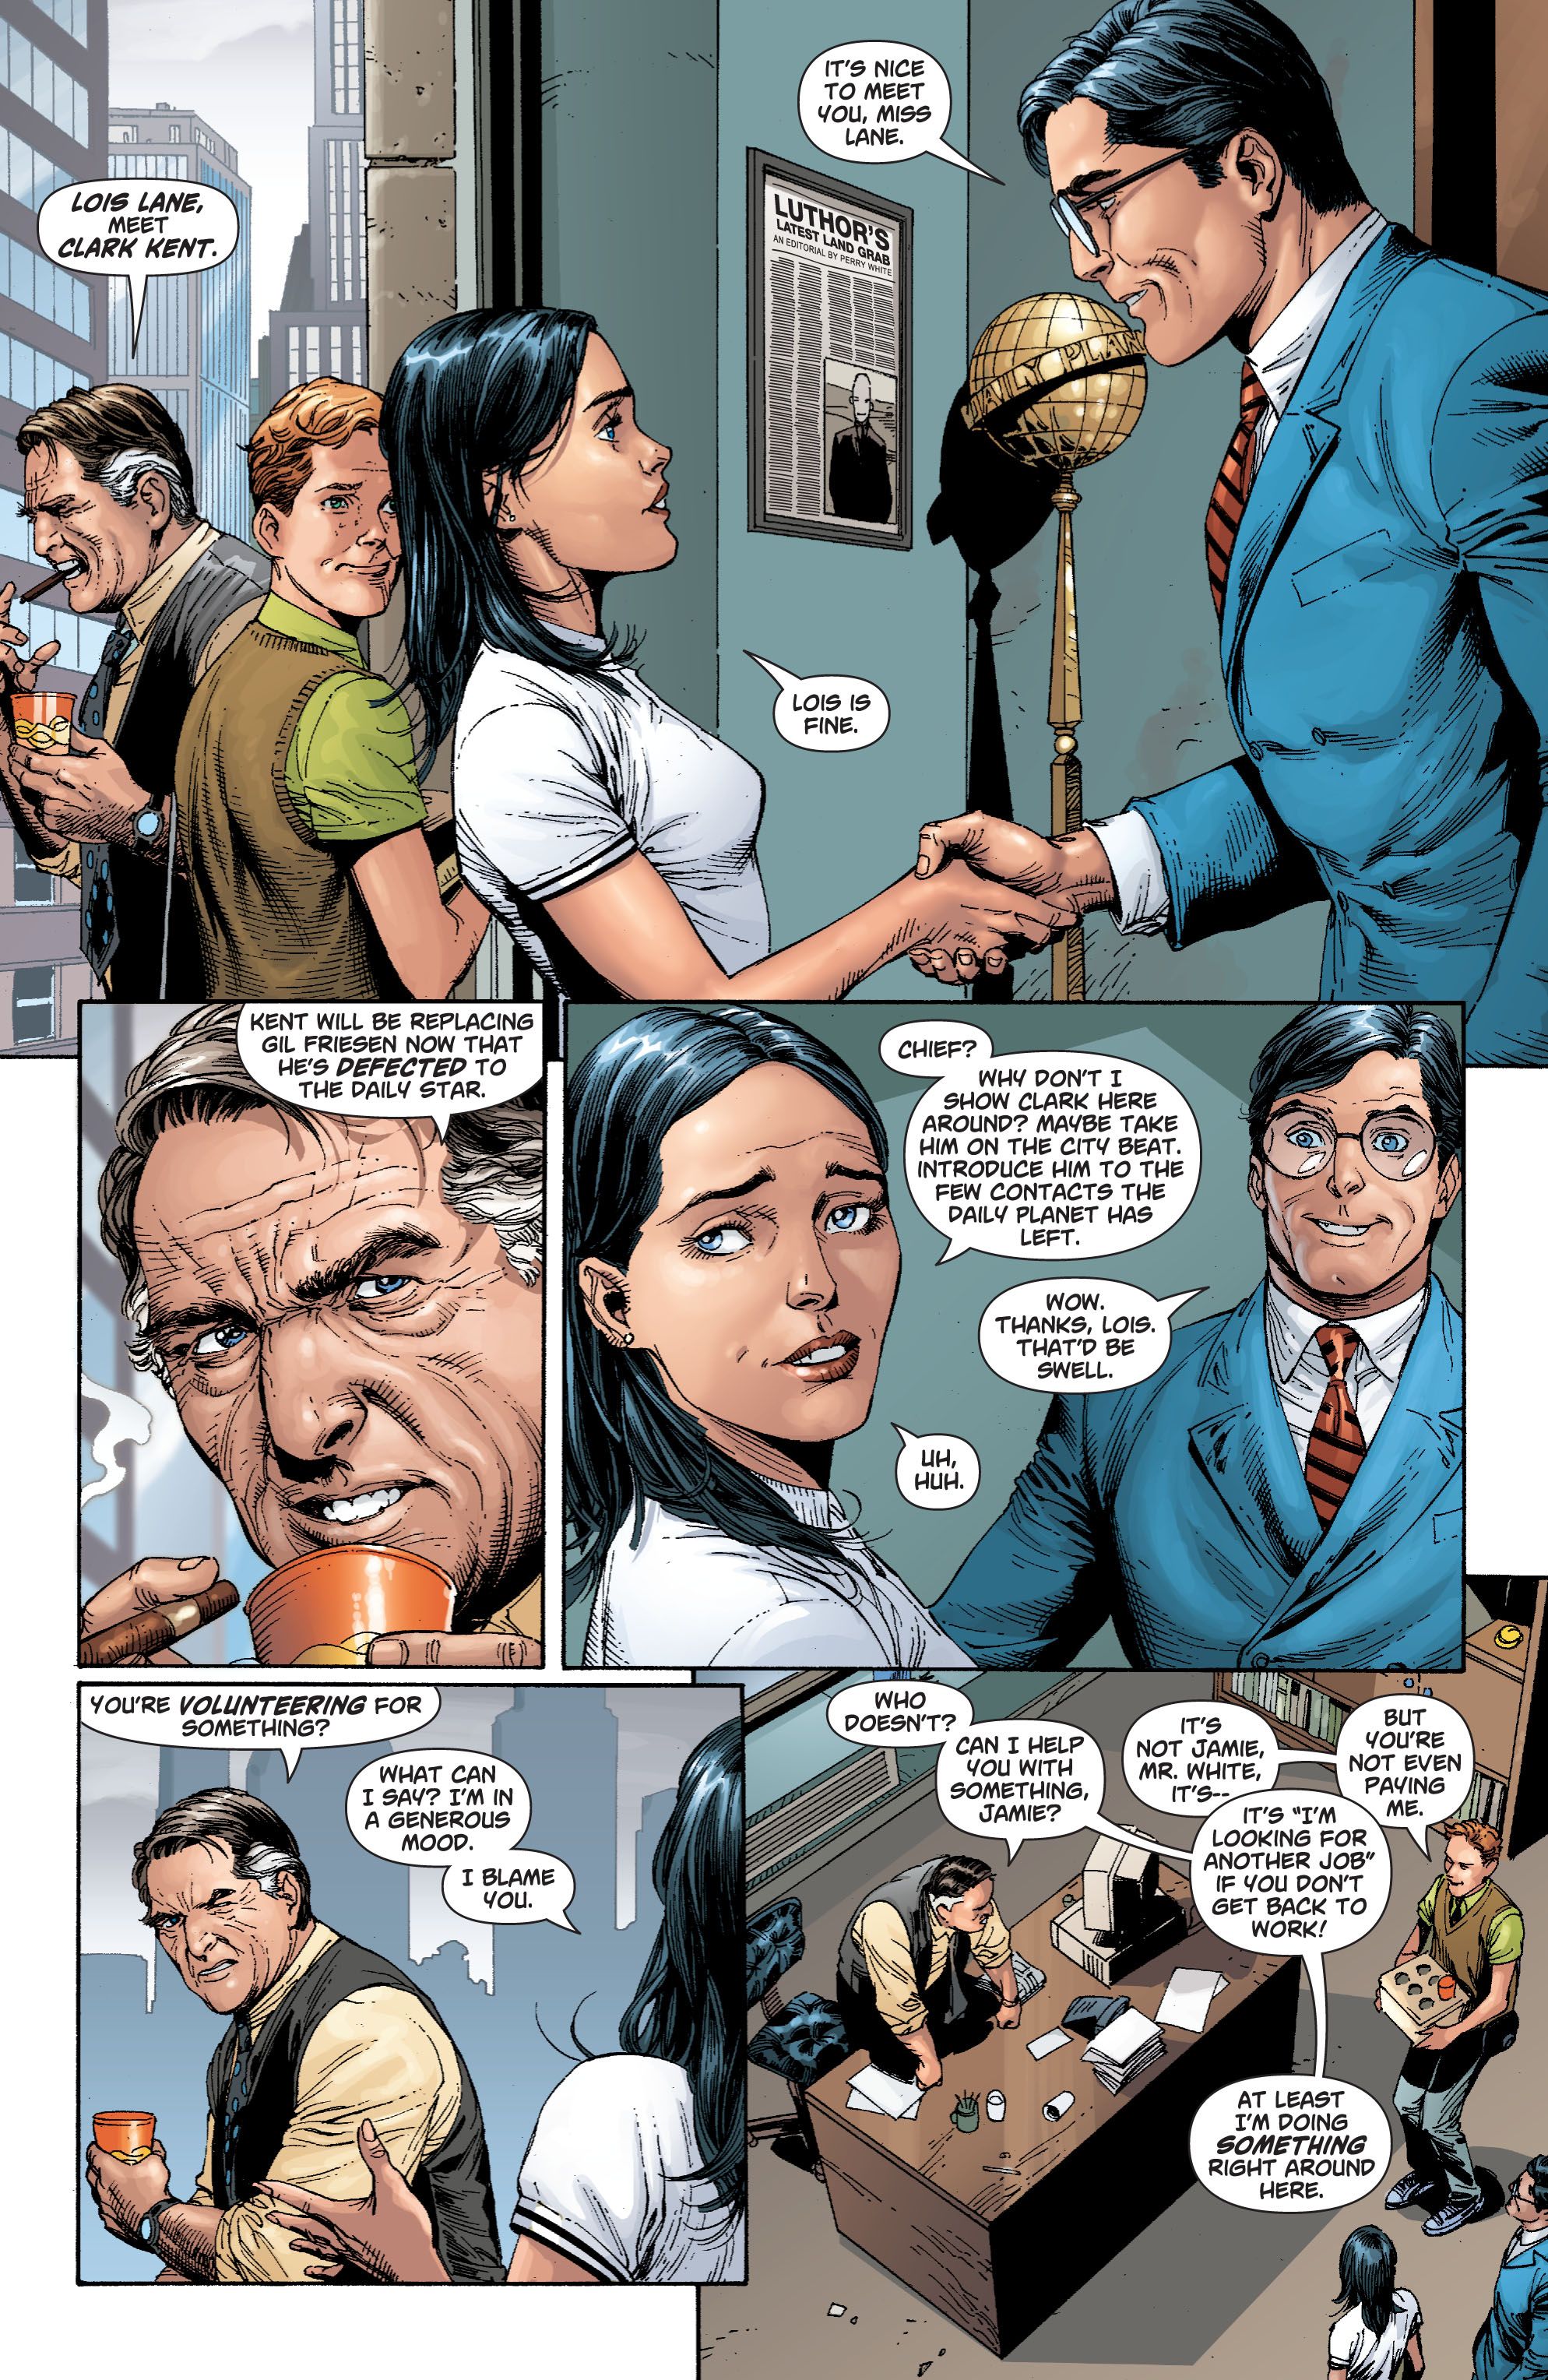 The Daily Planet is short reporters, so Clark Kent is hired